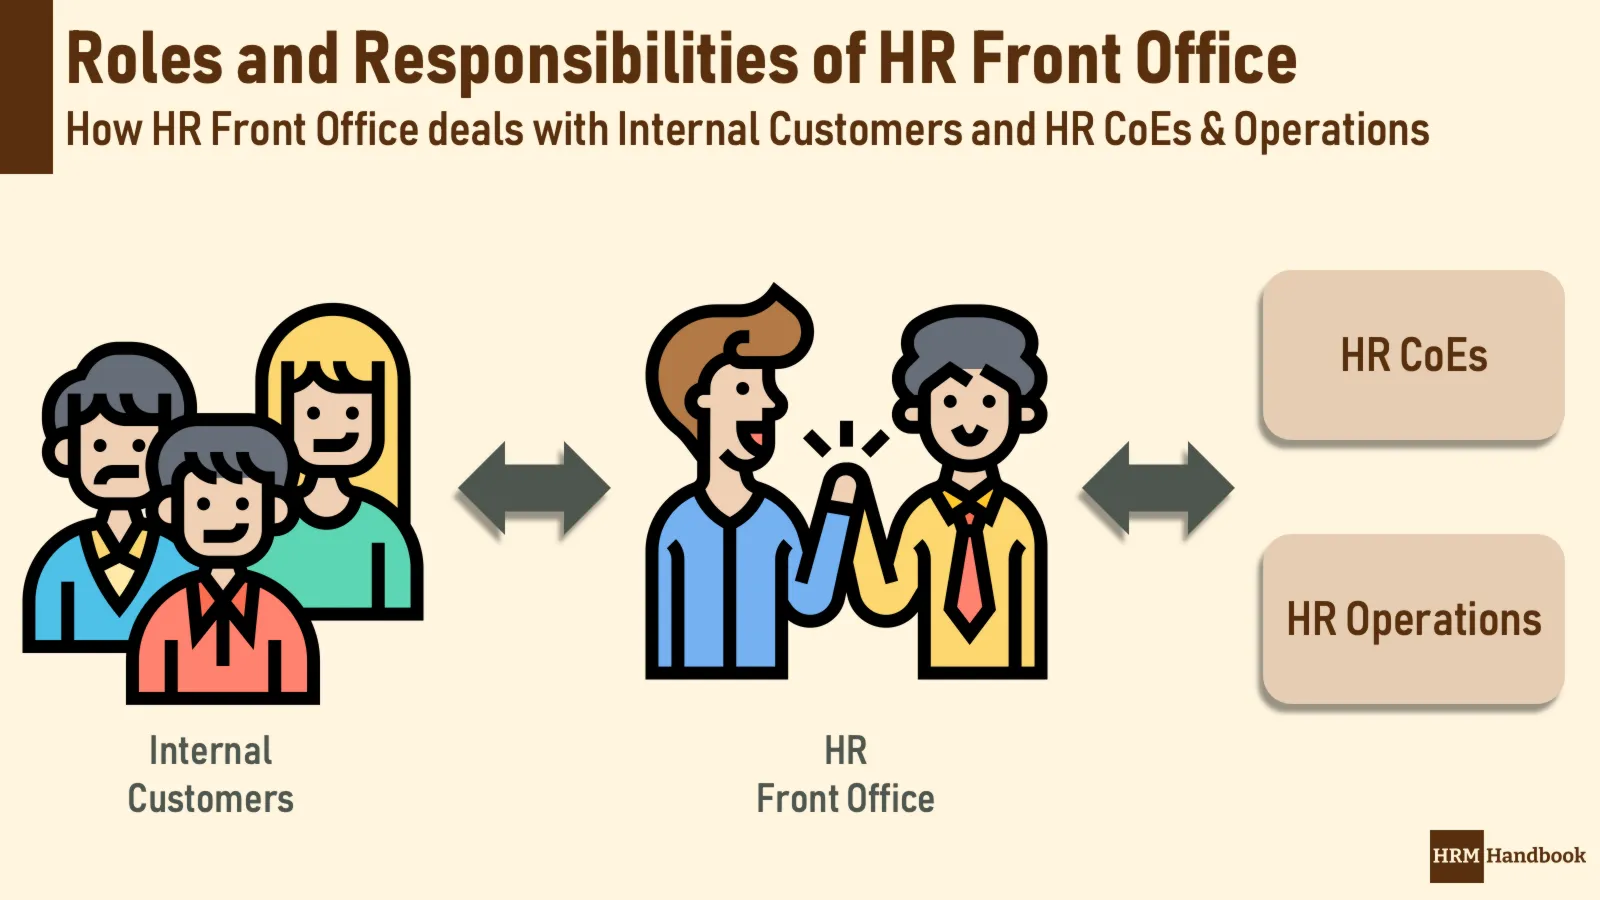 Role of HR Front Office